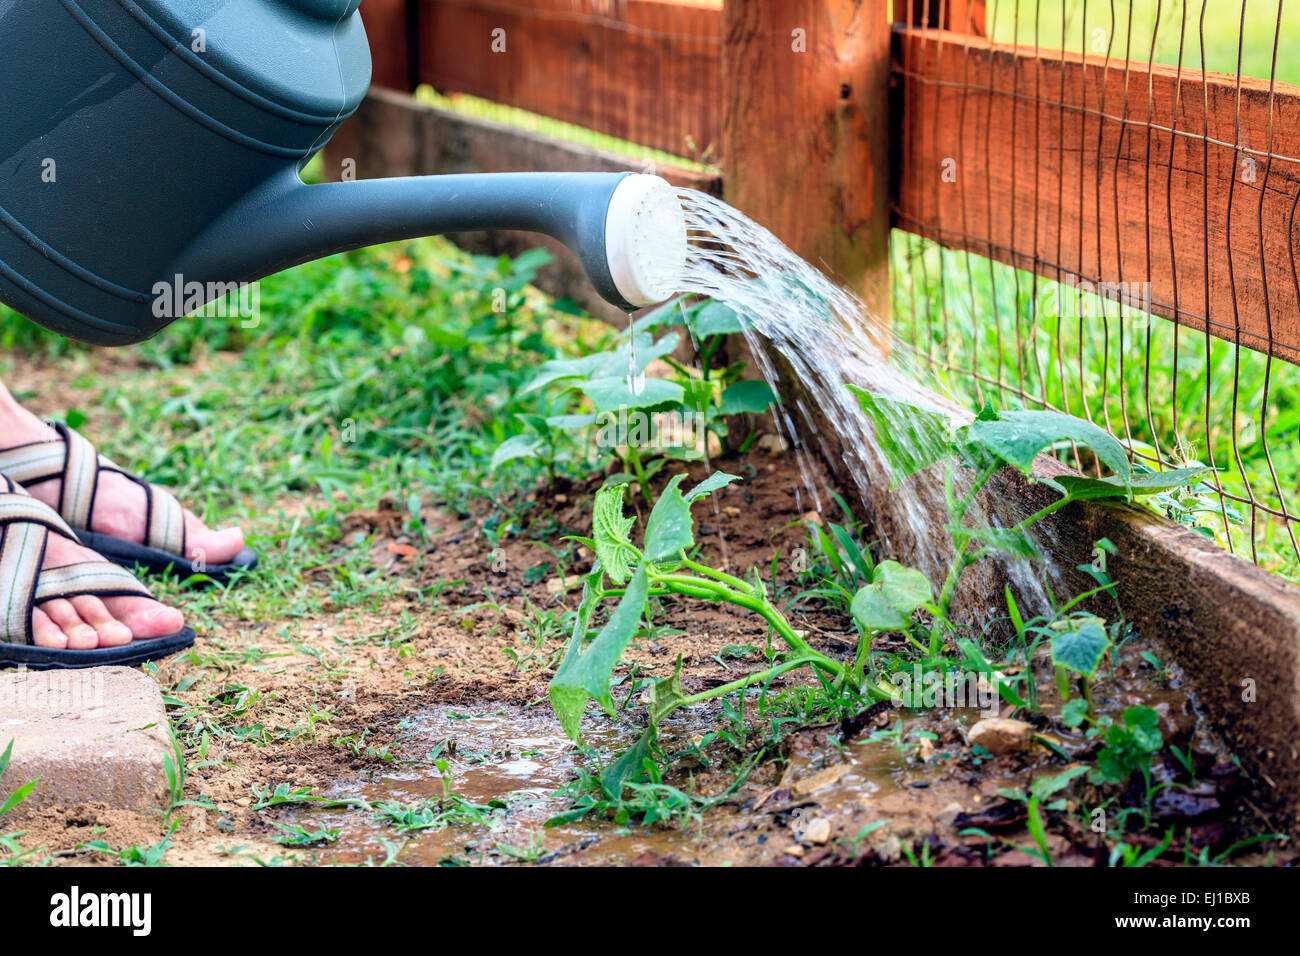 Closeup image of garden plants being watered Stock Photo